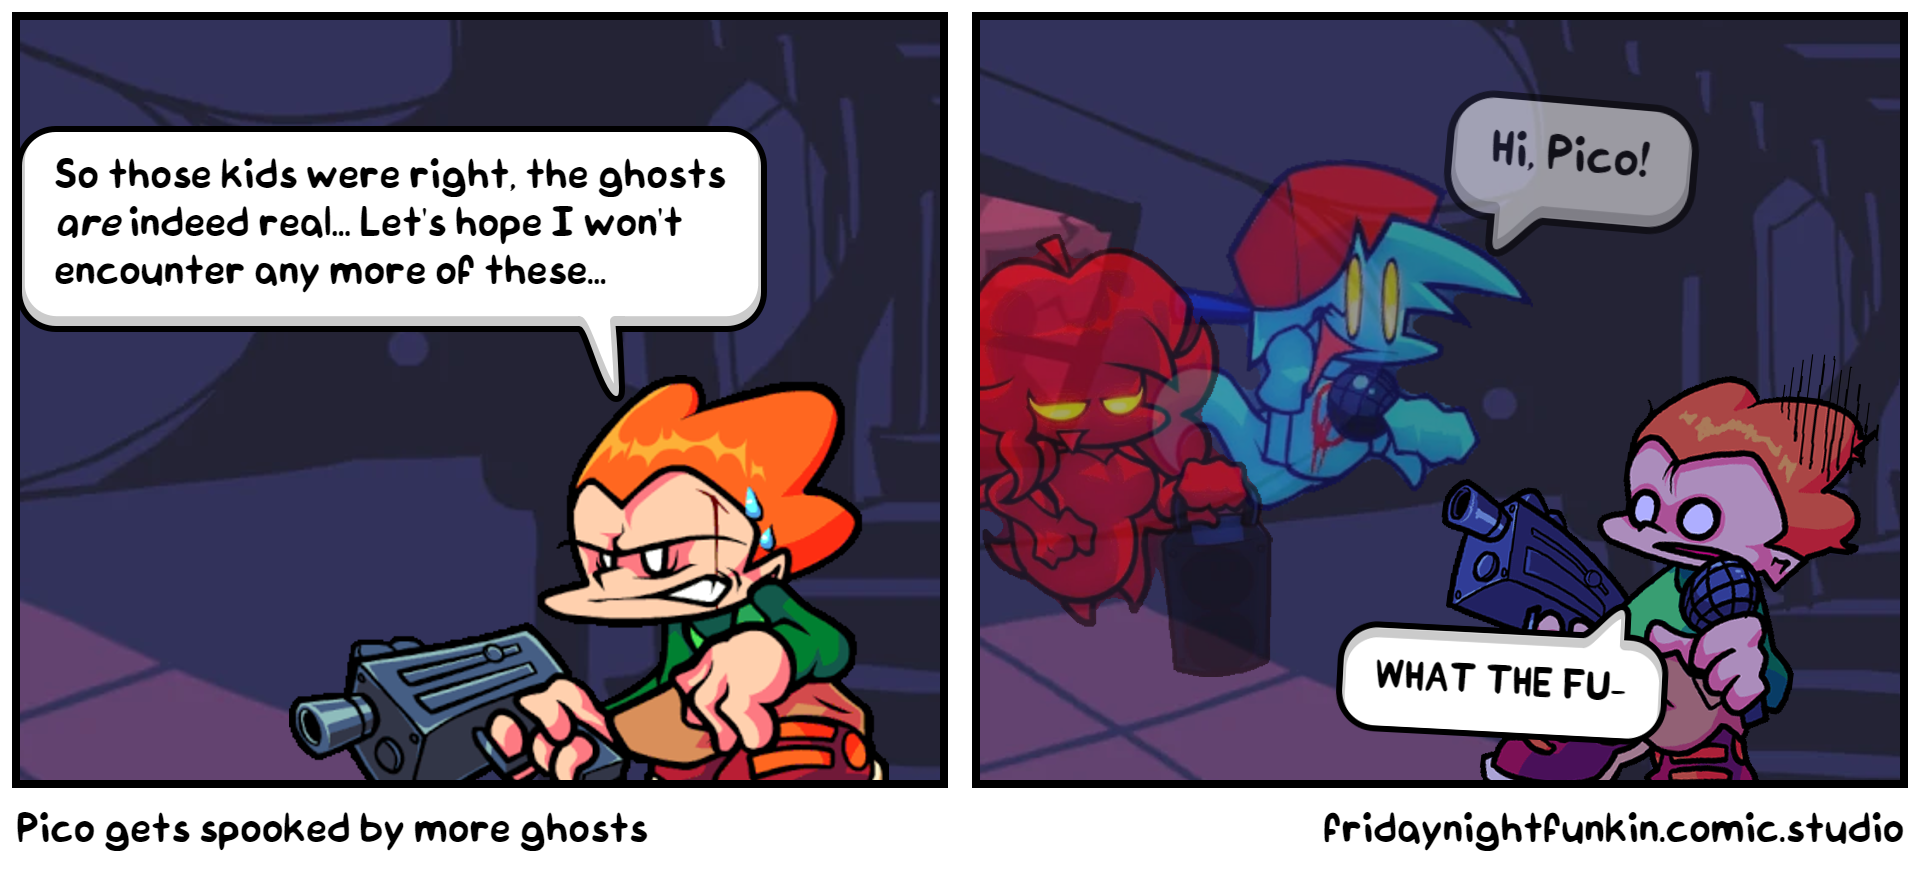 Pico gets spooked by more ghosts